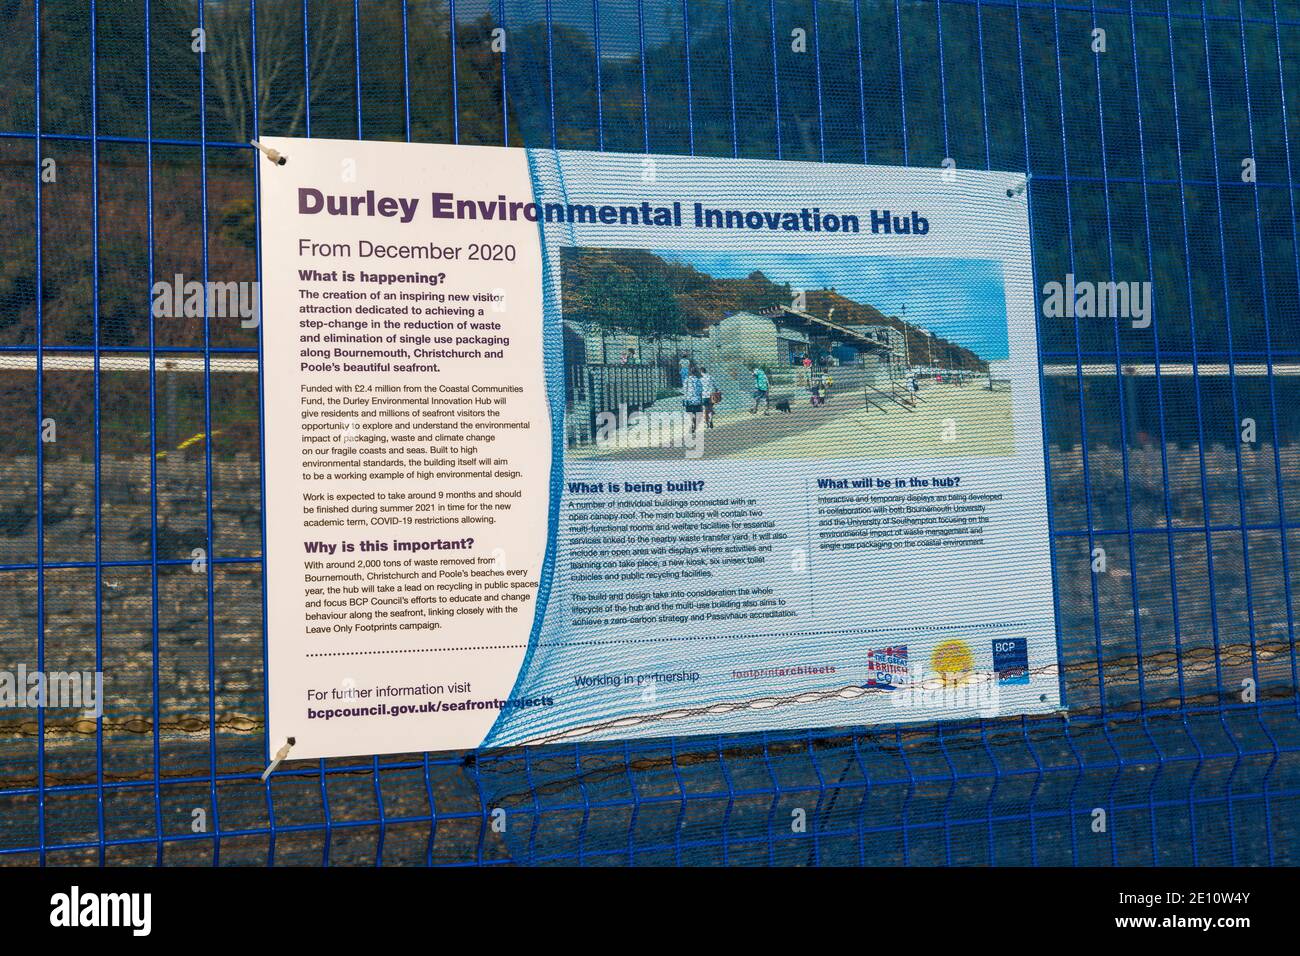 Durley Environmental Innovation Hub information board at Durley Chine, Bournemouth, Dorset UK in December Stock Photo